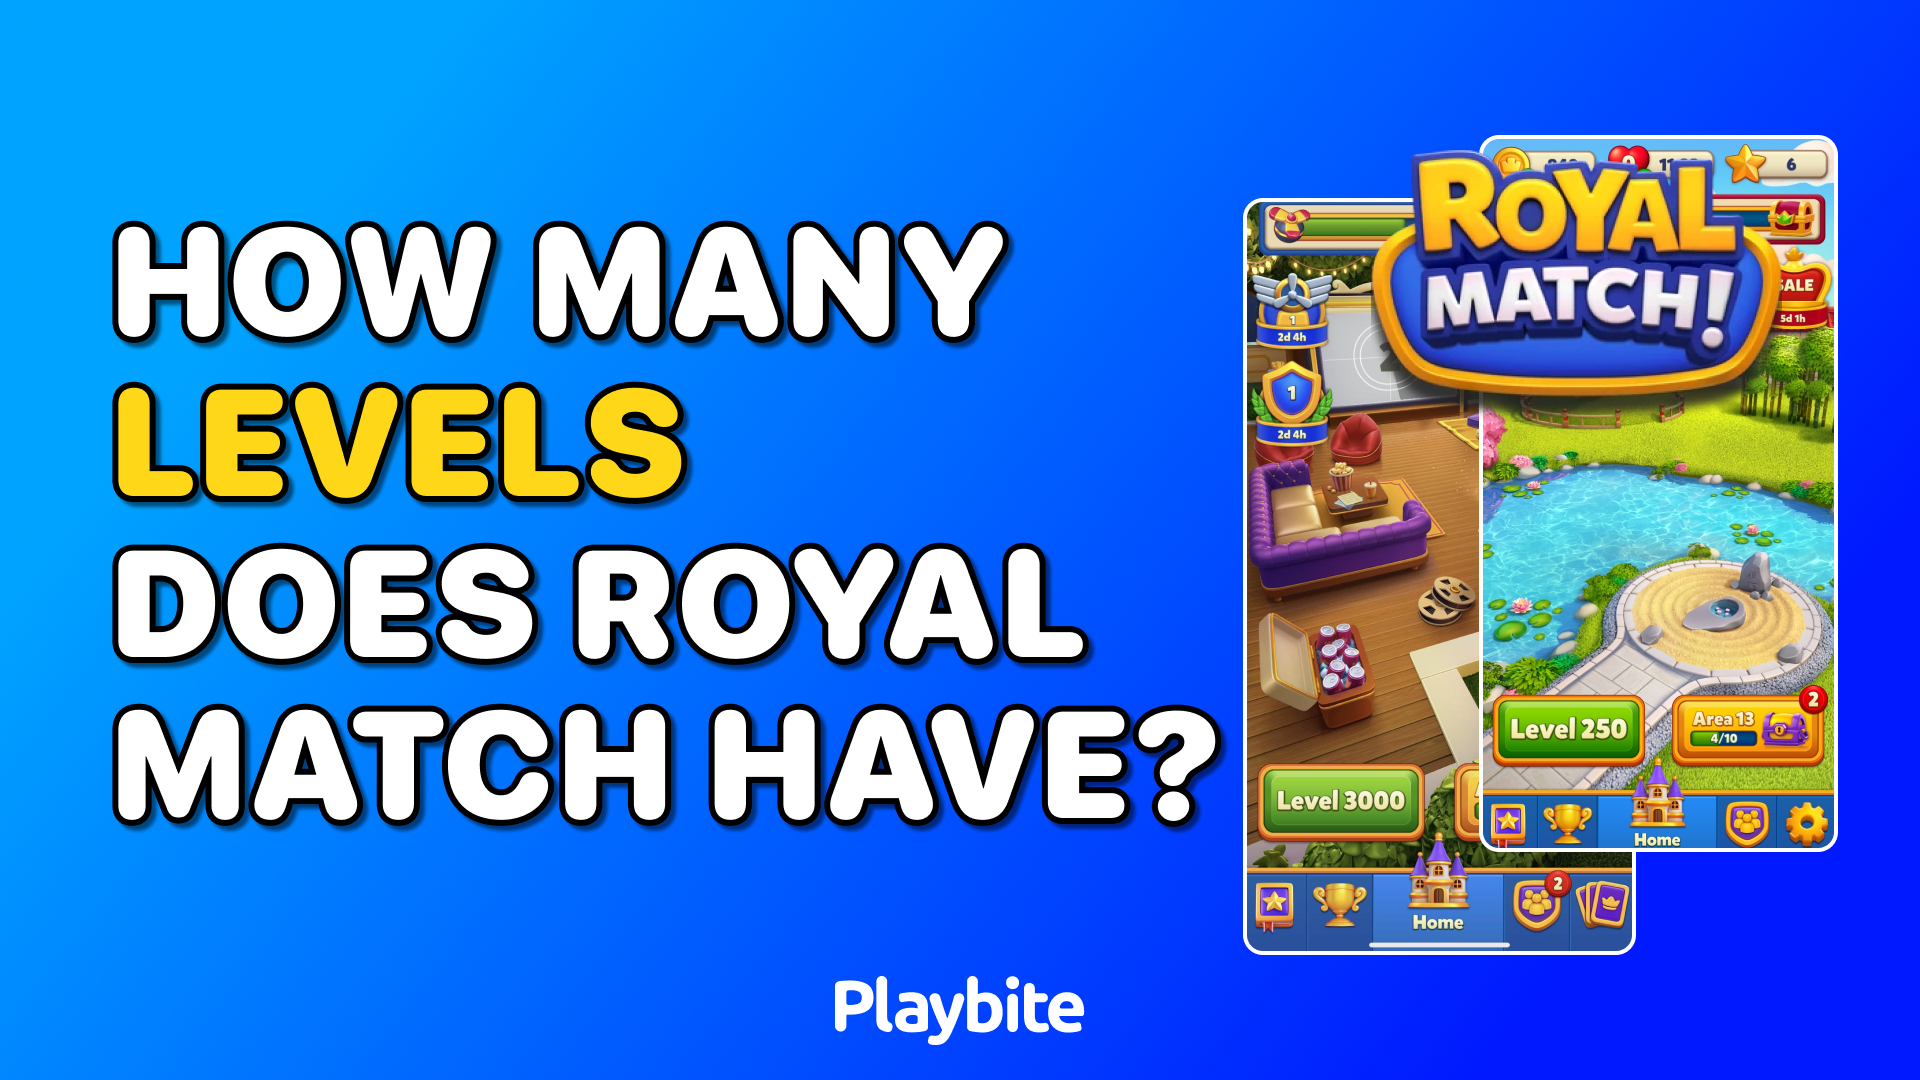 How Many Levels Does Royal Match Have?